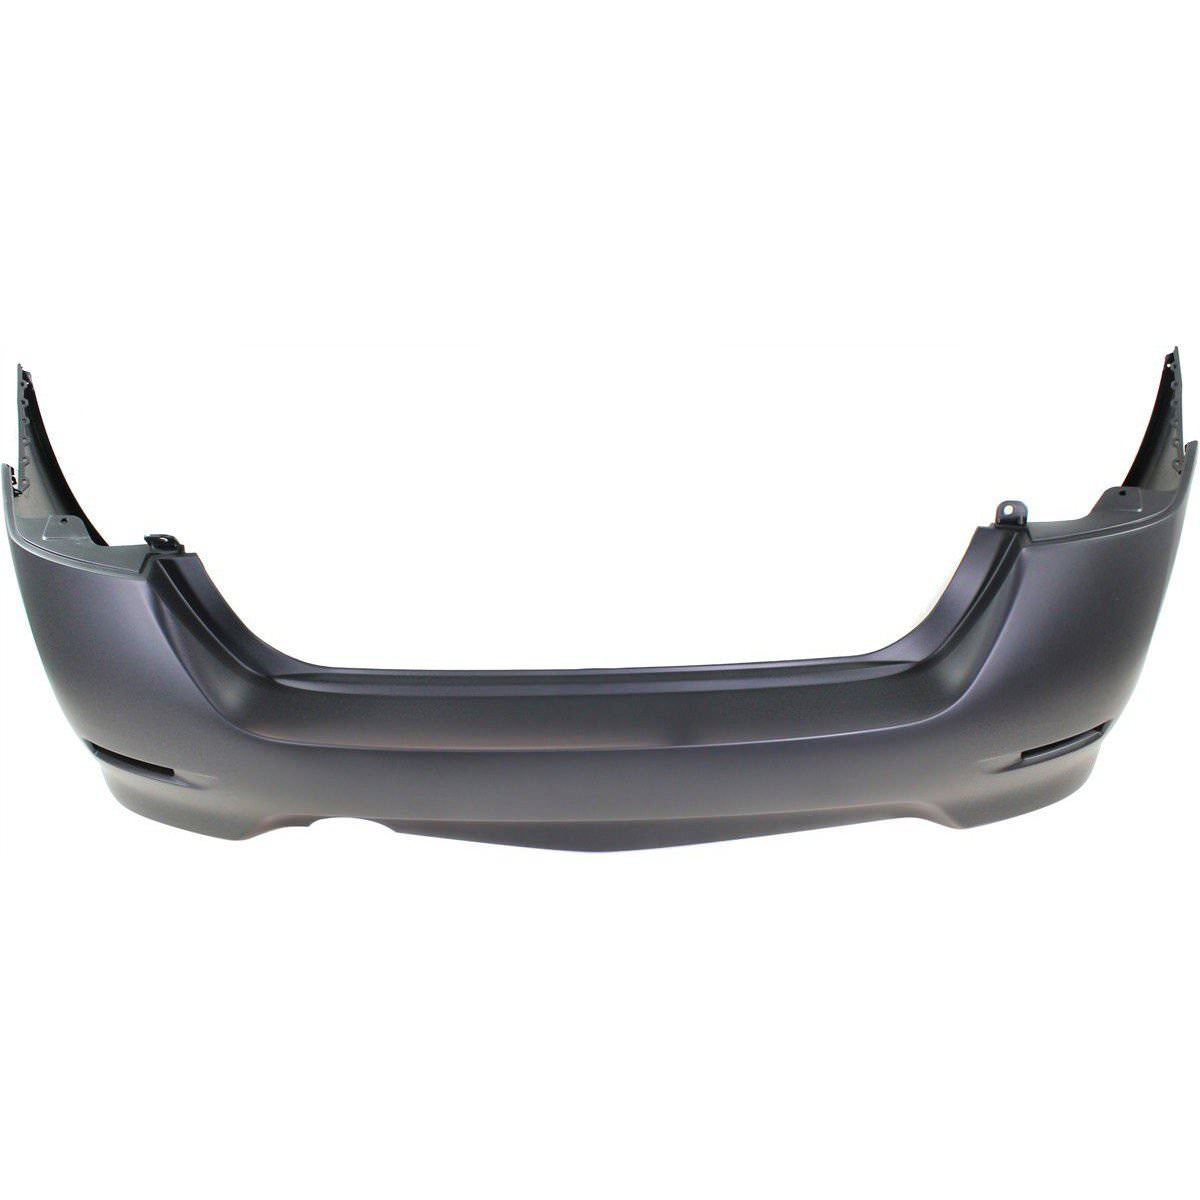 2013-2015 NISSAN SENTRA Rear Bumper Cover SL|SR Painted to Match